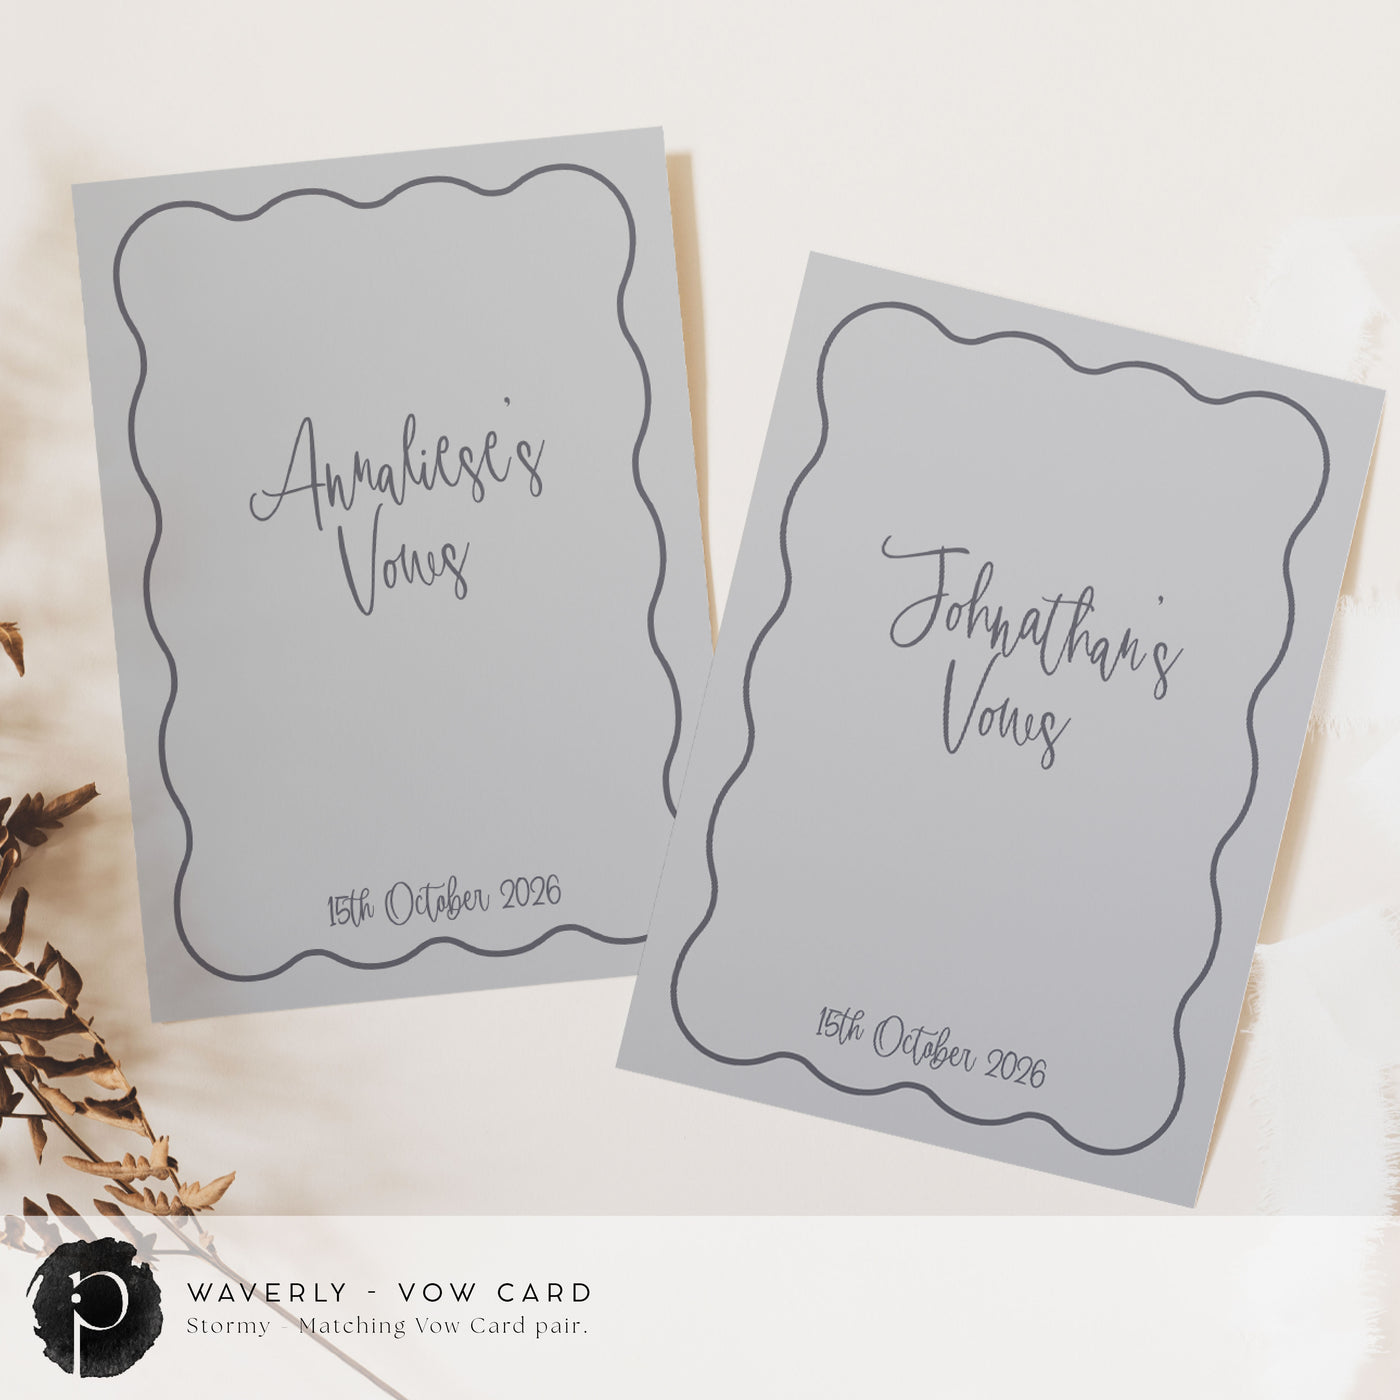 A pair of vow cards to write your wedding vows on in a modern retro wedding theme in dark grey on a light grey background